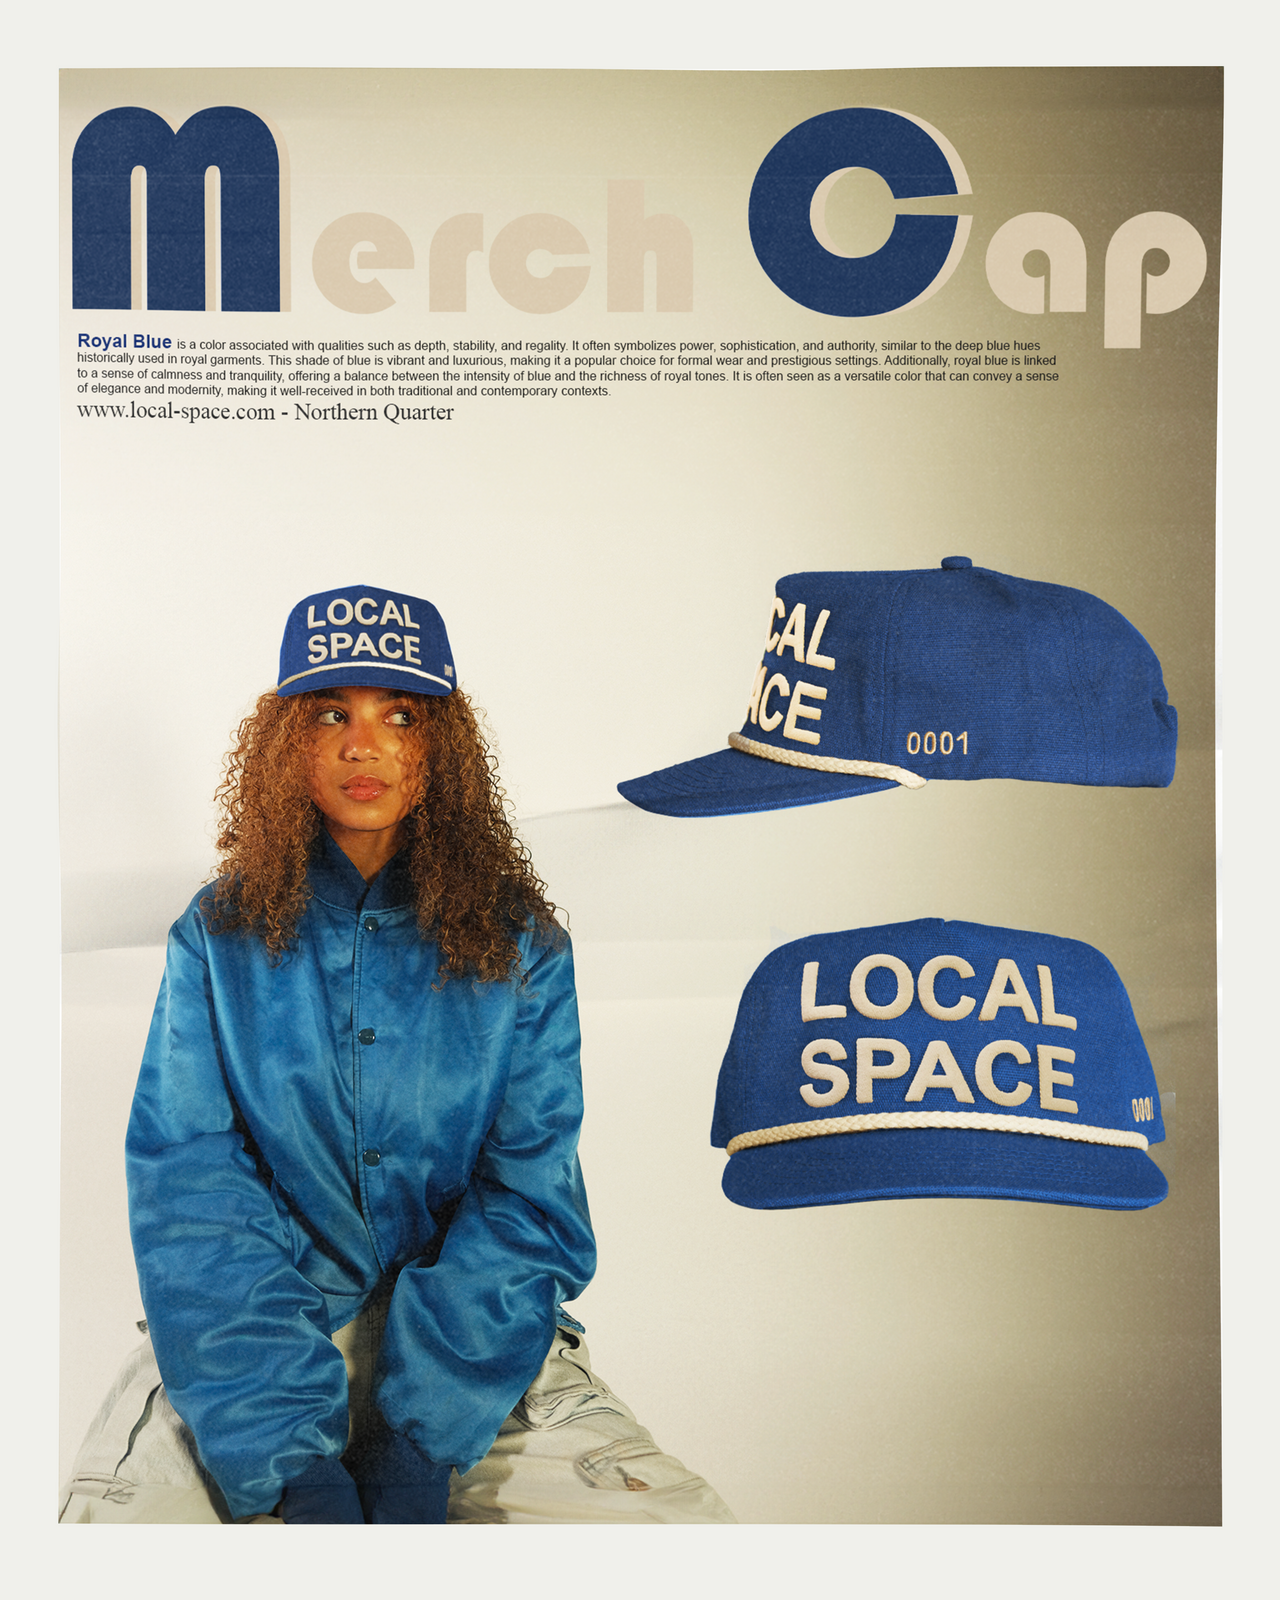 Royal Blue Merch Cap featuring 'LOCAL SPACE' in puff print on the front, 'ISSUE 0001' embroidery on the side, vintage snapback fit, and a slightly curved brim, made from 100% cotton canvas.